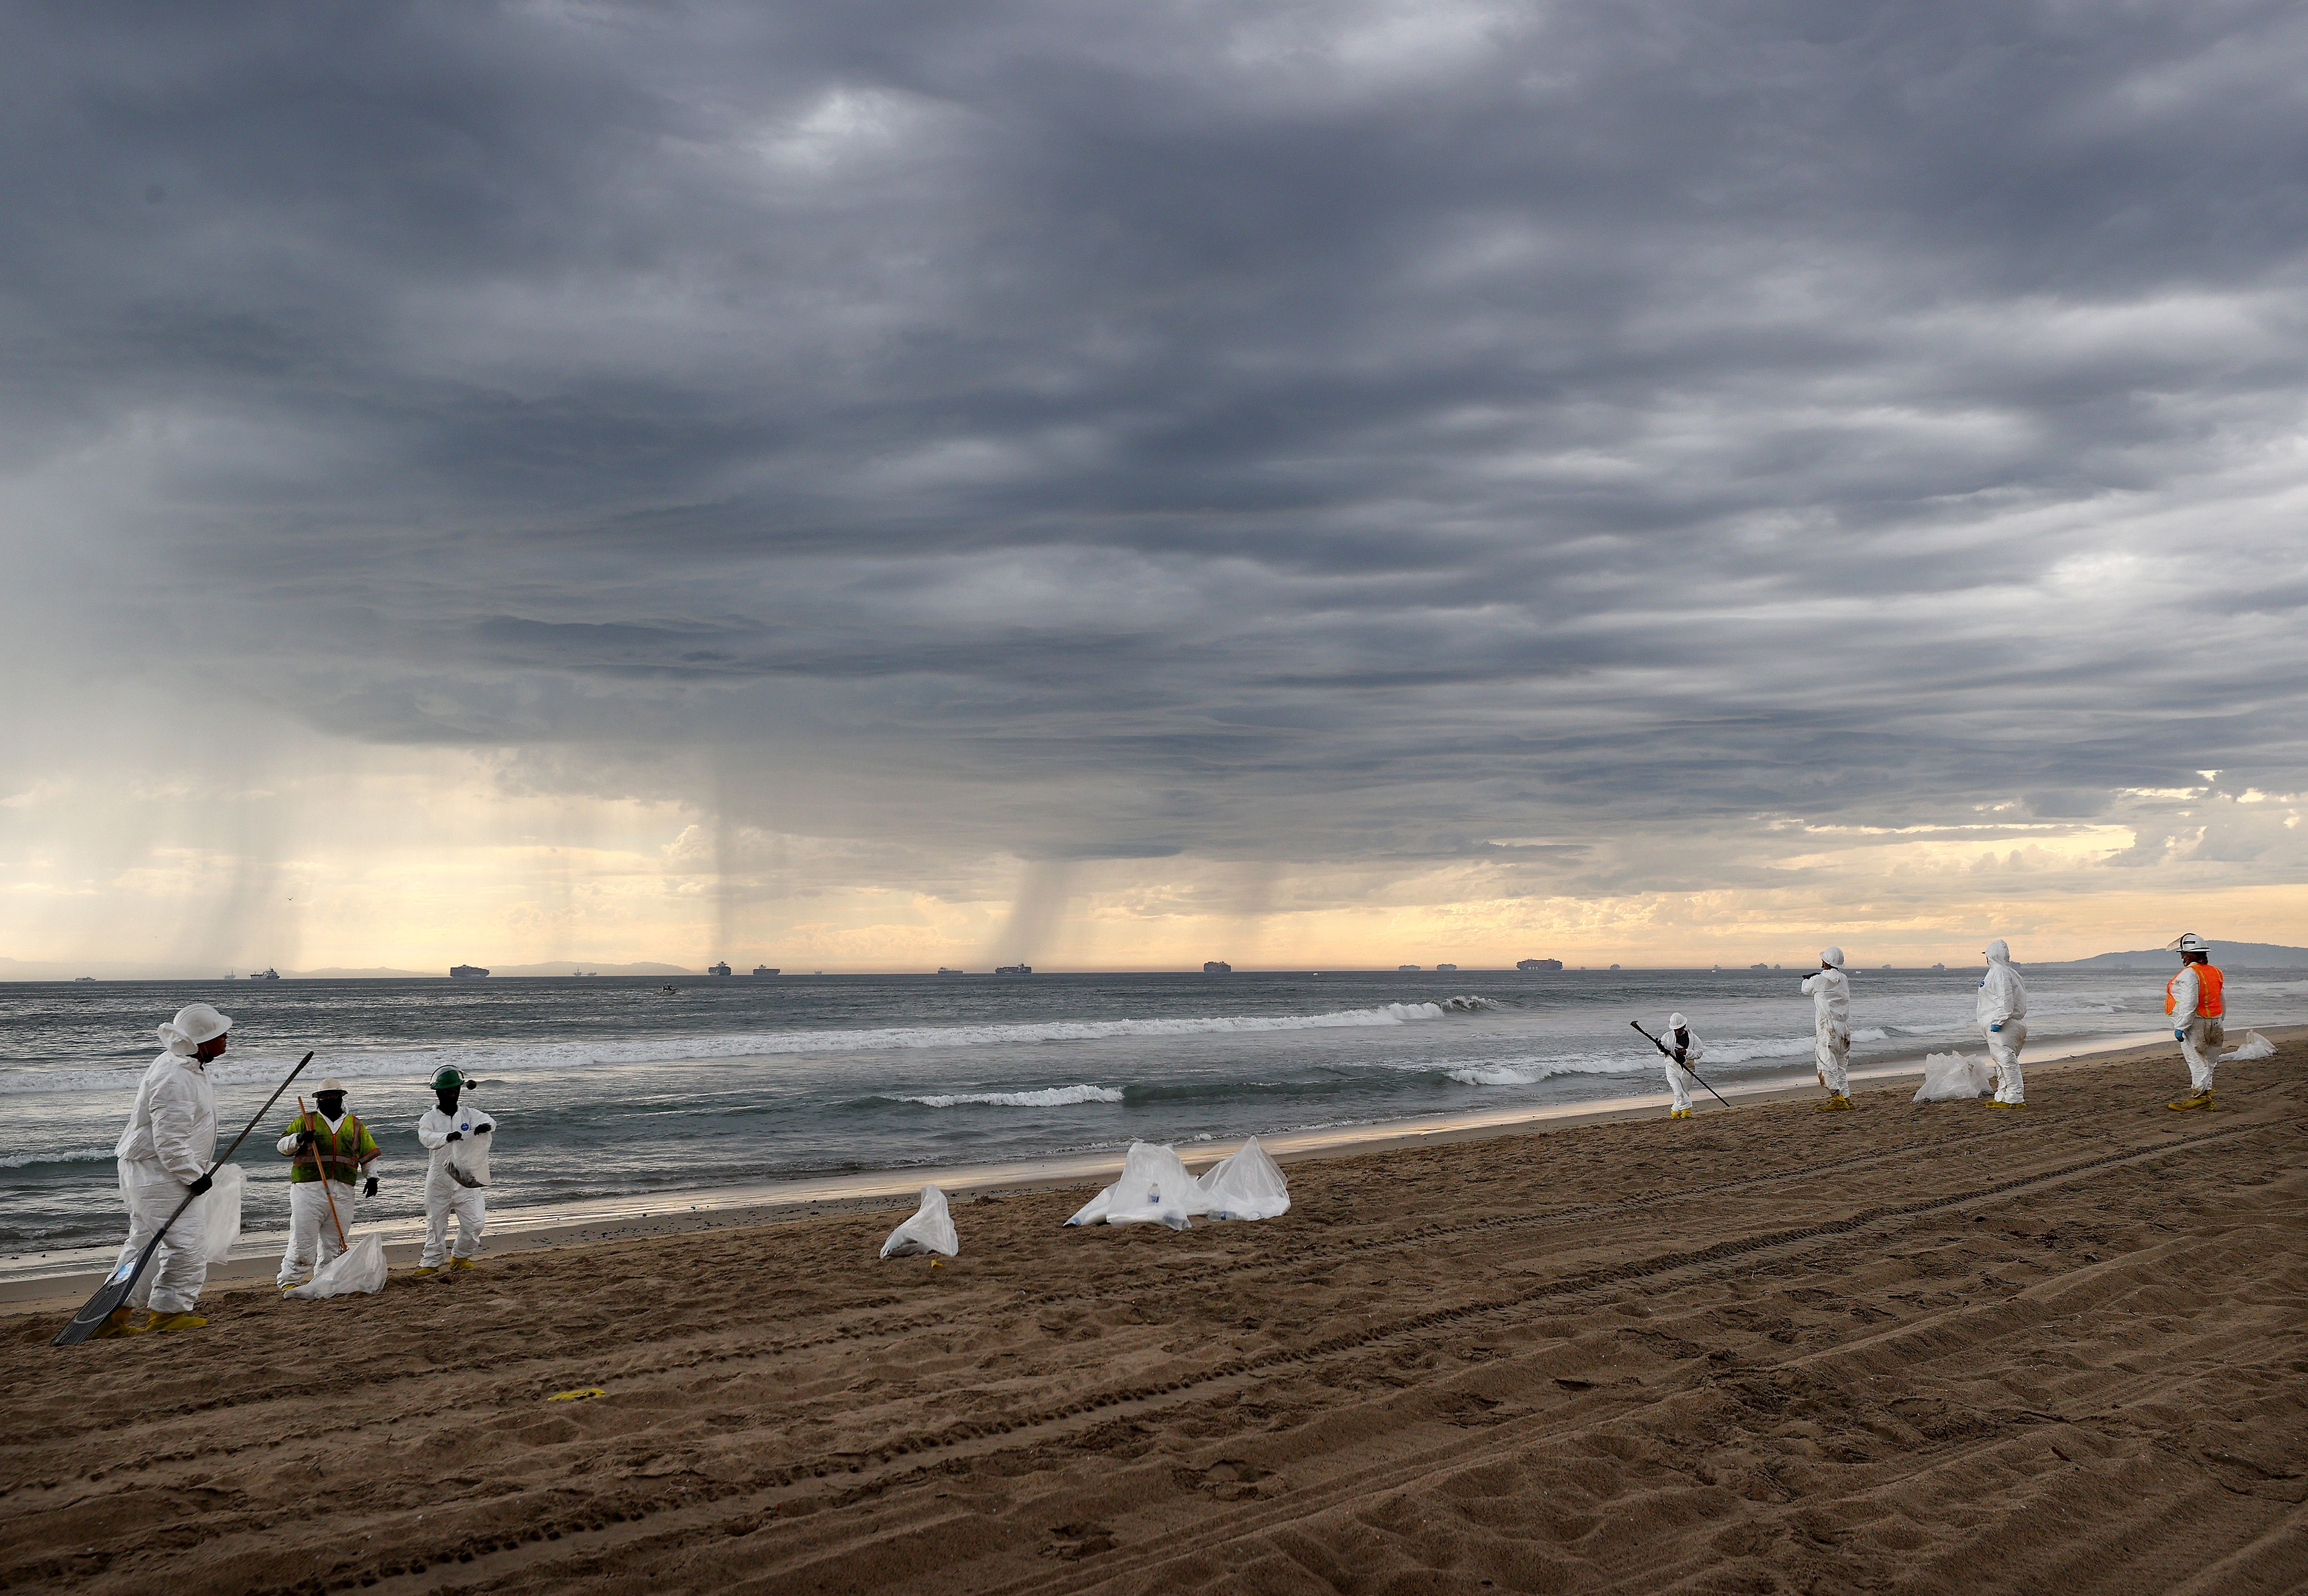 Cleanup workers in protective suits prepare to depart the closed Huntington State Beach as a storm approaches after a 126,000-gallon oil spill from an offshore oil platform on October 4